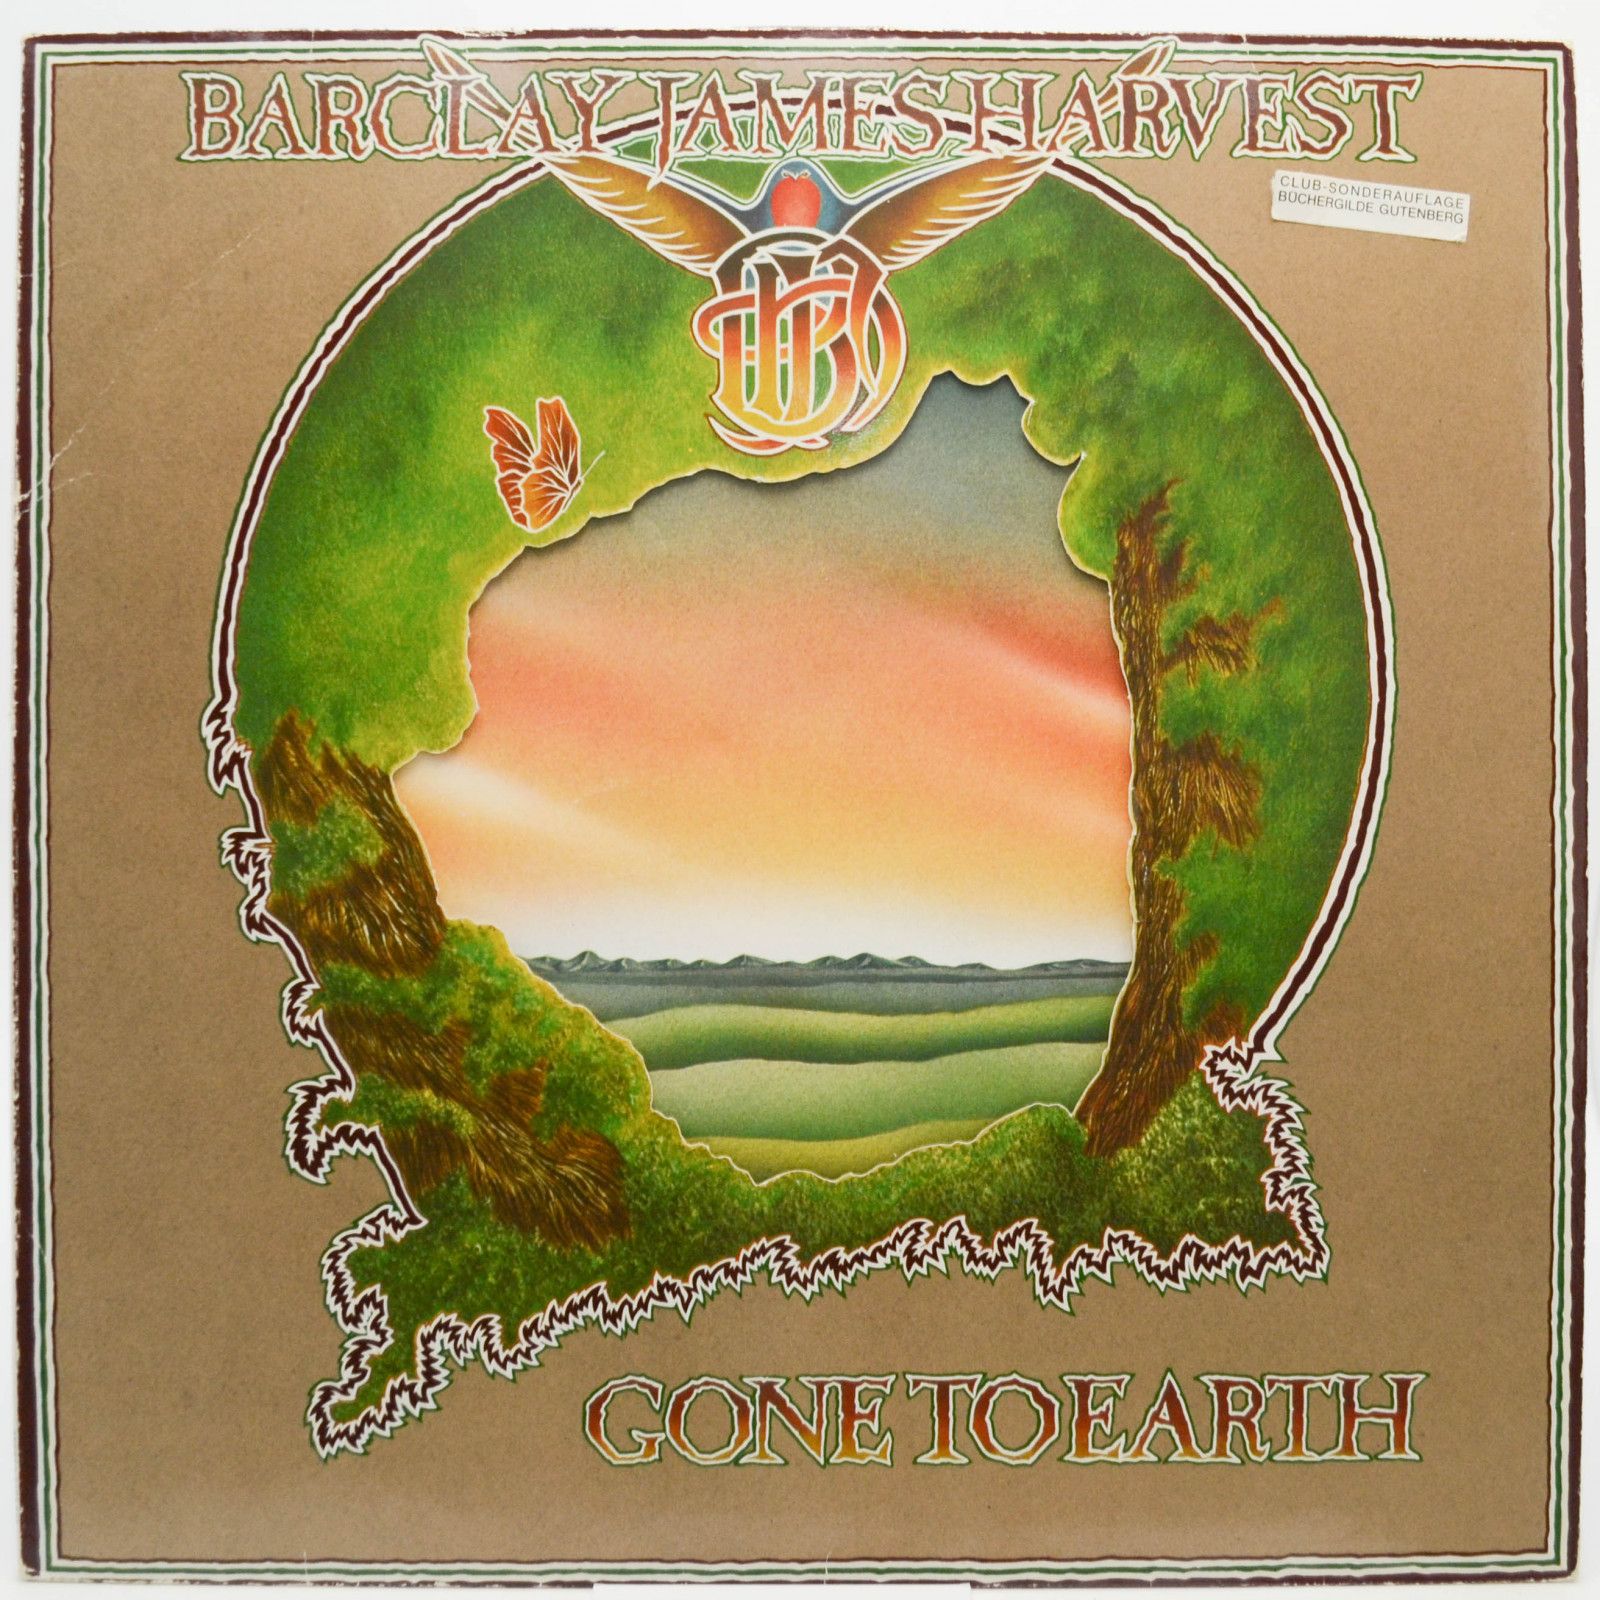 Barclay James Harvest — Gone To Earth, 1977